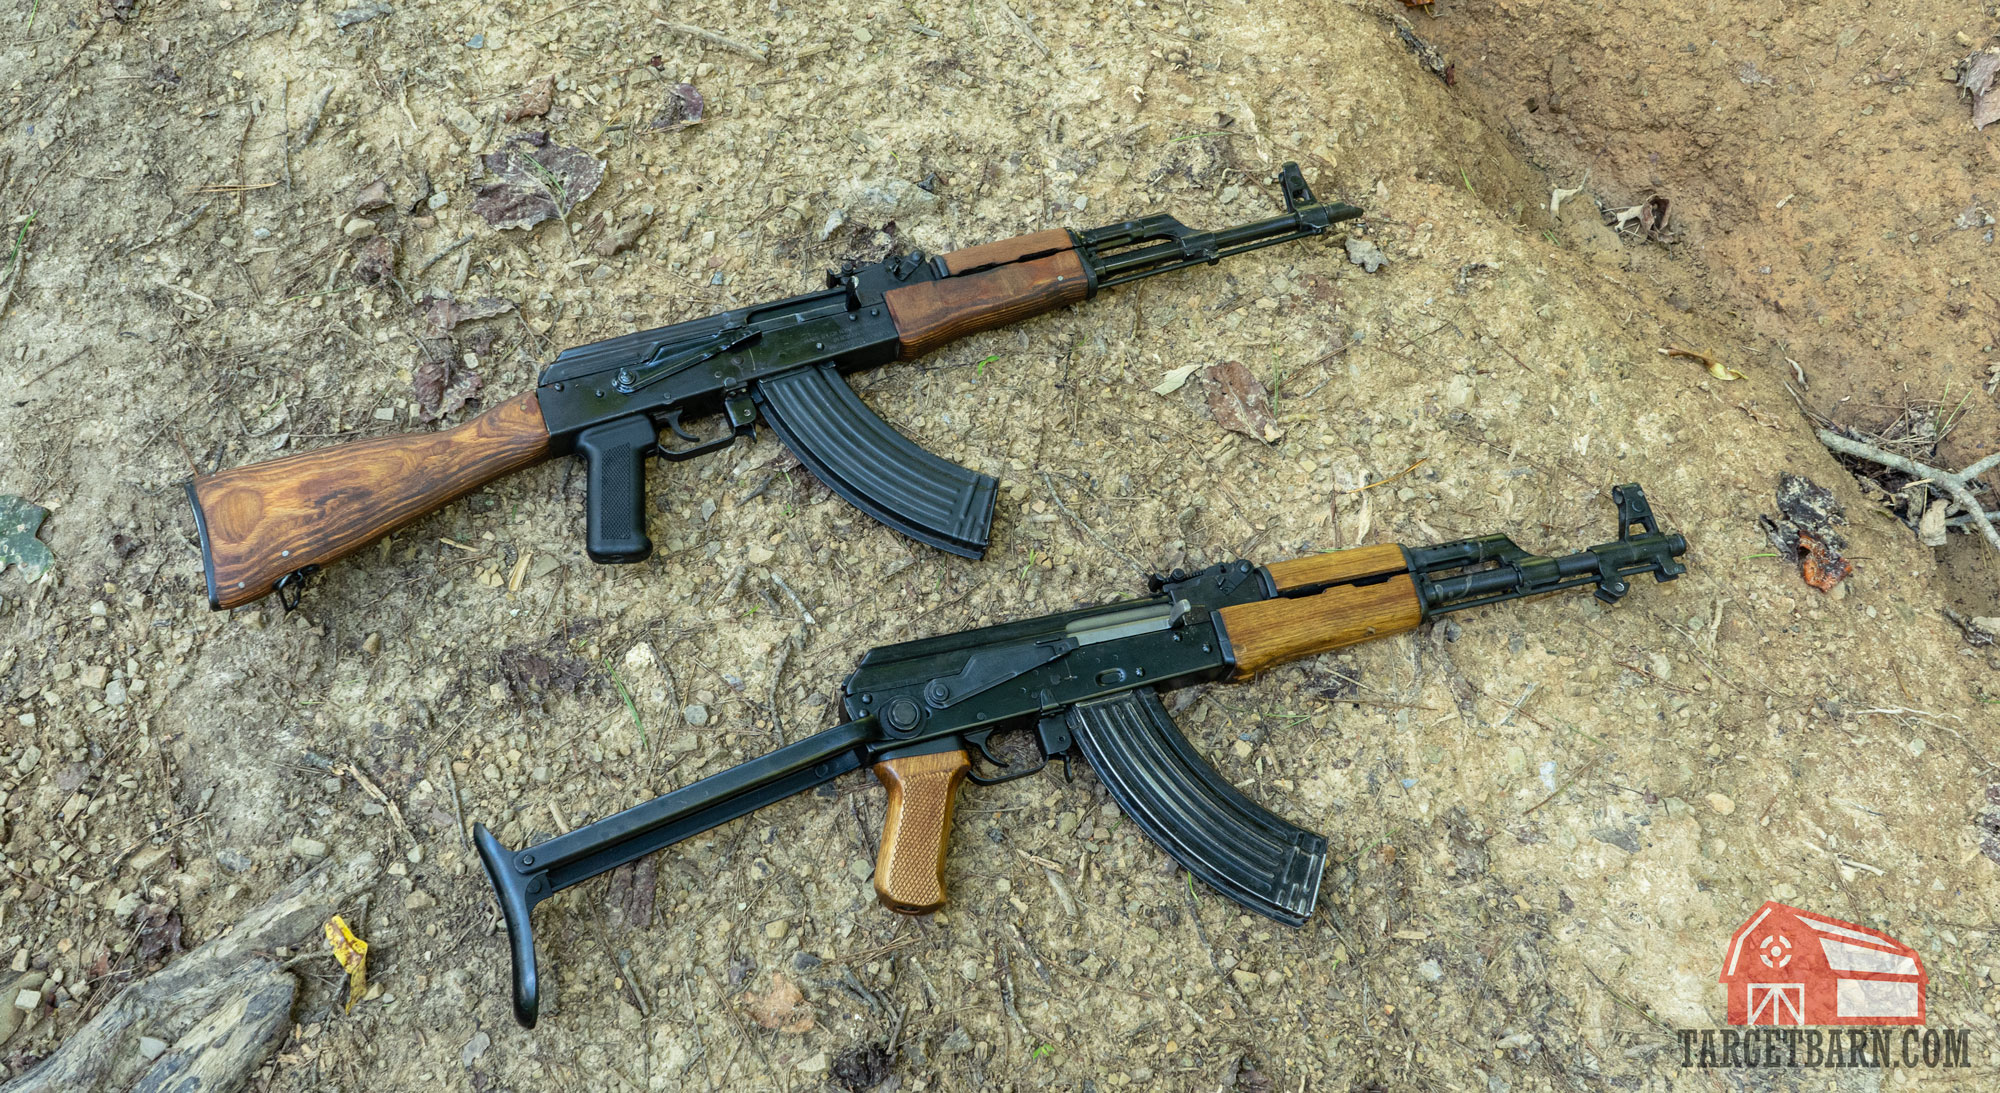 two ak-47 variants laying on the ground, showing the wasr10 and aks